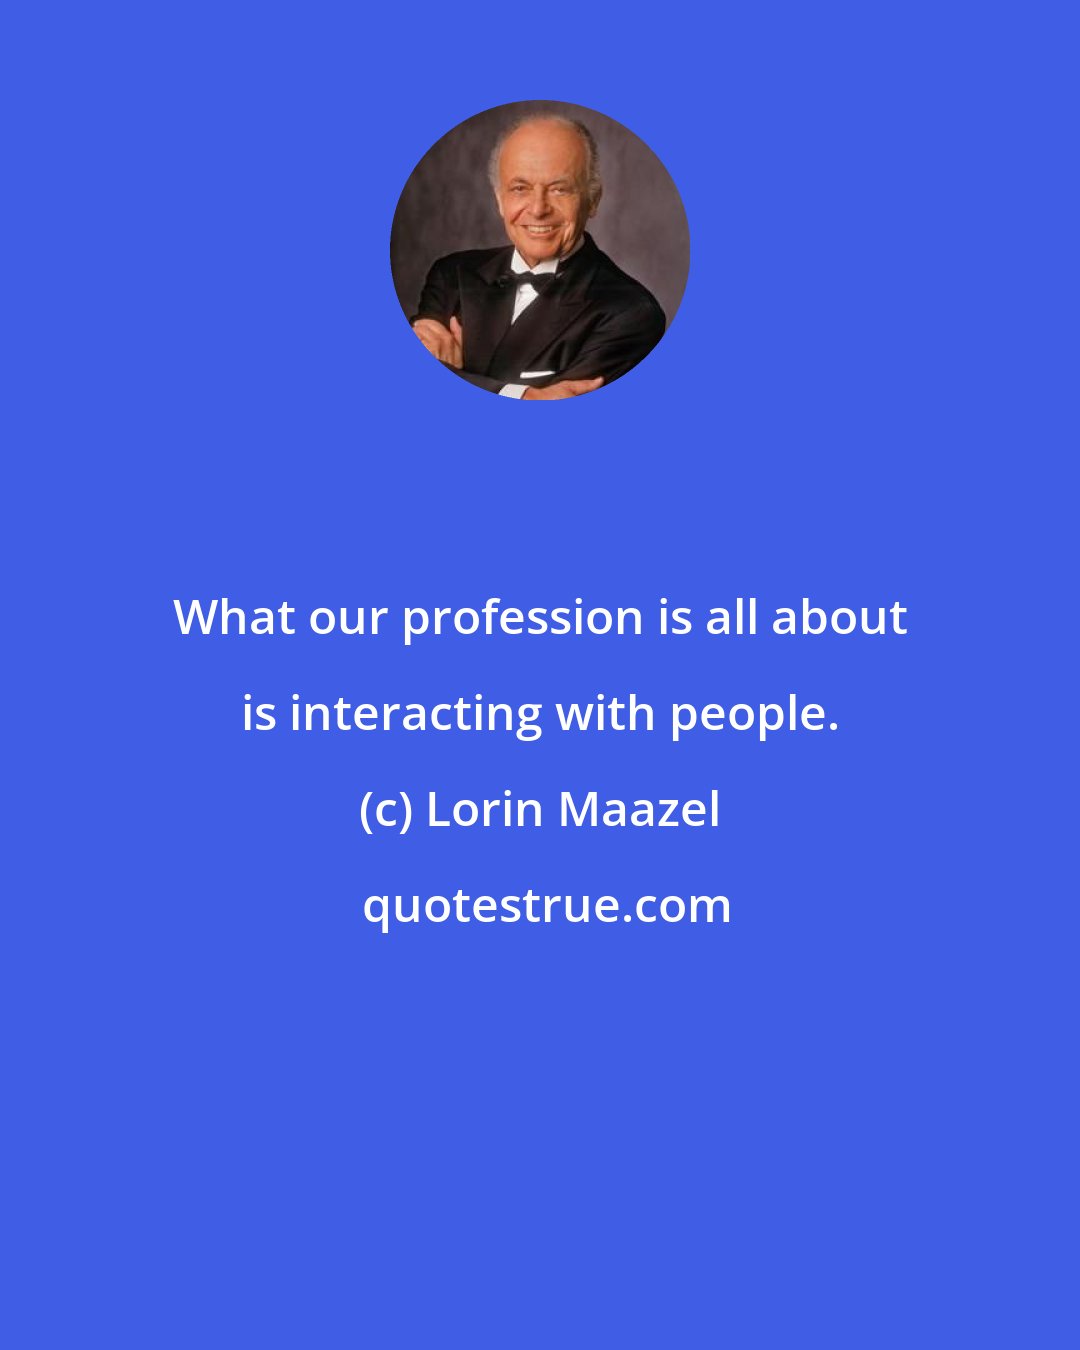 Lorin Maazel: What our profession is all about is interacting with people.